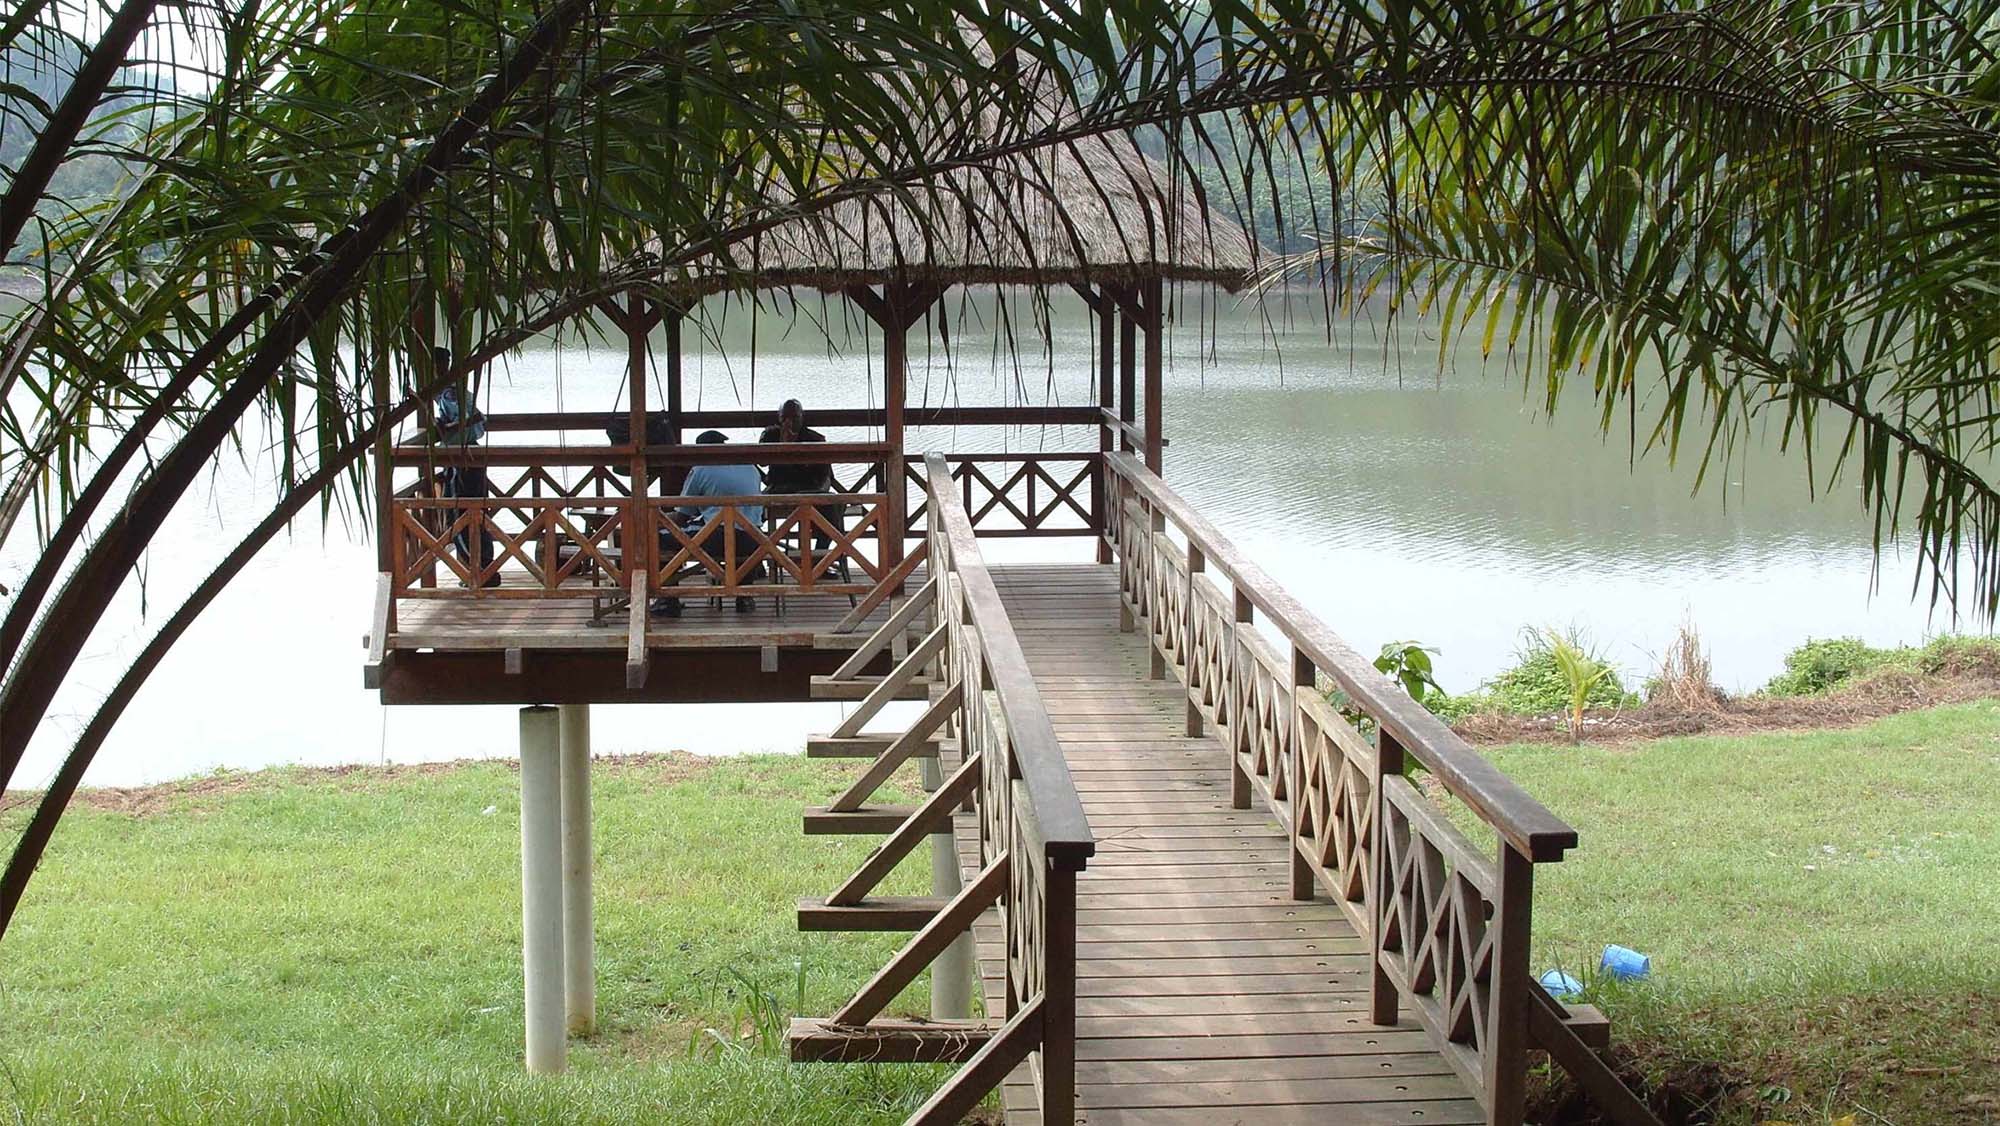 New 265ha integreated world class business and leisure resort located on the Calabar River.Photo: Bilfinger Berger